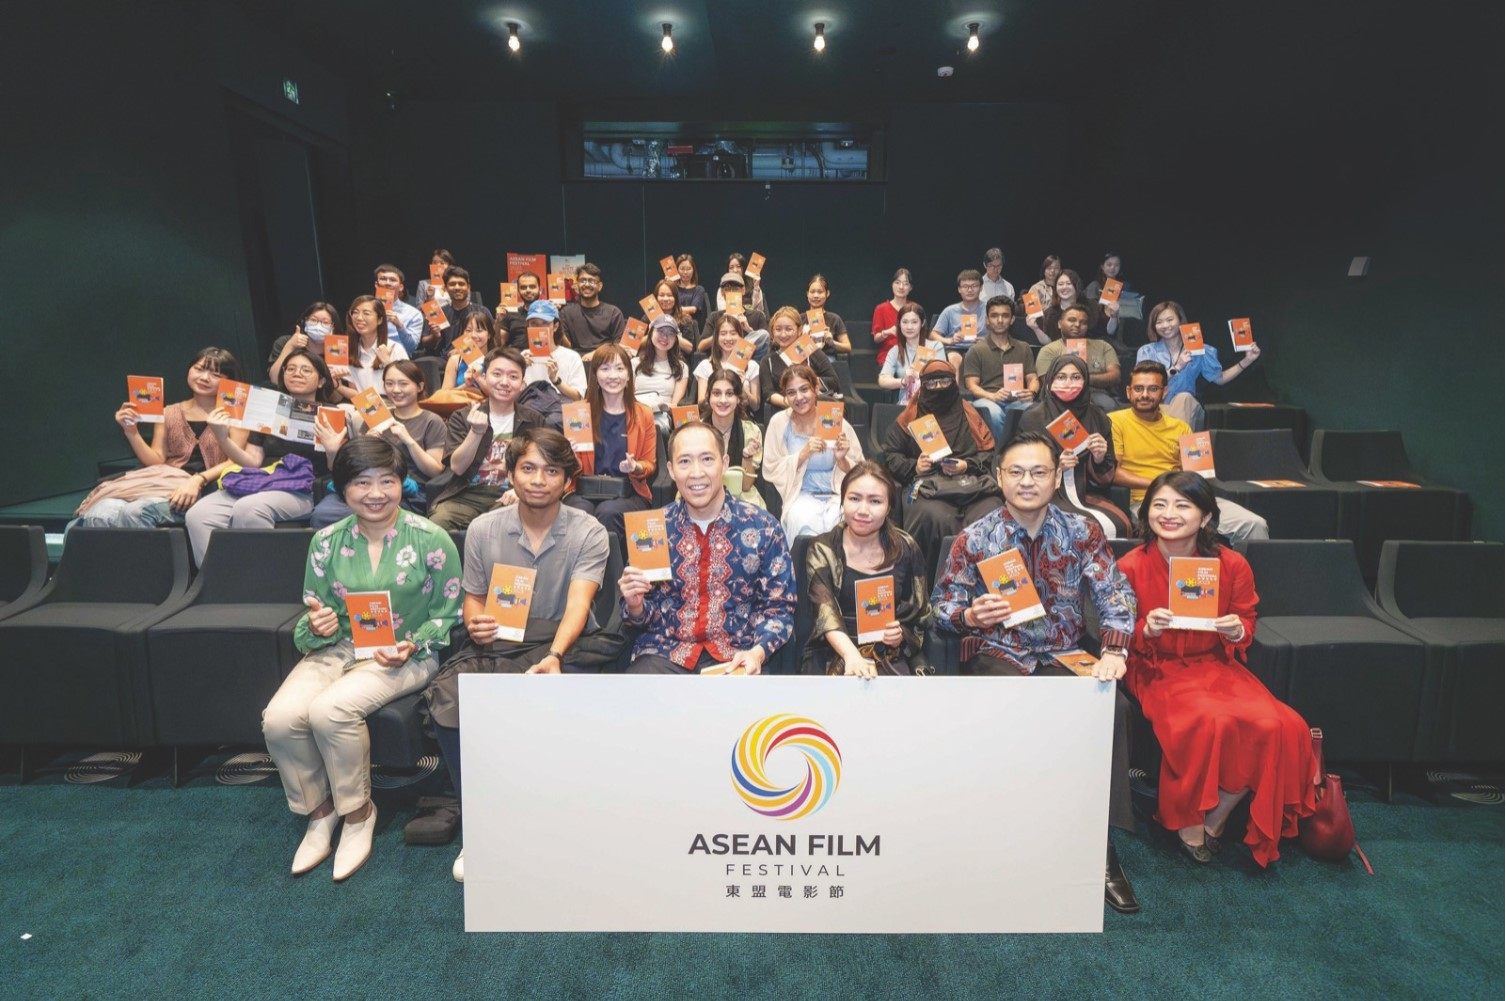 The ASEAN Film Festival aims to promote cross-cultural exchange. Mr Kavich Neang, Director of ‘White Building’, (Front Row, Second Left); Mr Daryl Ng, Chairman of HK-ASEAN Foundation (Third Left); Mrs Phoeung Chanthida, the Vice Consul of Cambodia in Hong Kong (Third Right); Mr Charles Chia, CEO of HK-ASEAN Foundation (Second Right); Ms Melanie Kwok, Assistant General Manager (Sustainability), Hong Kong Heritage Conservation Foundation (First Right); and Ms Vivian Lee, Group General Manager of Corporate Marketing, Communications and Sustainability of Sino Group (First Left). Photo: Handout 